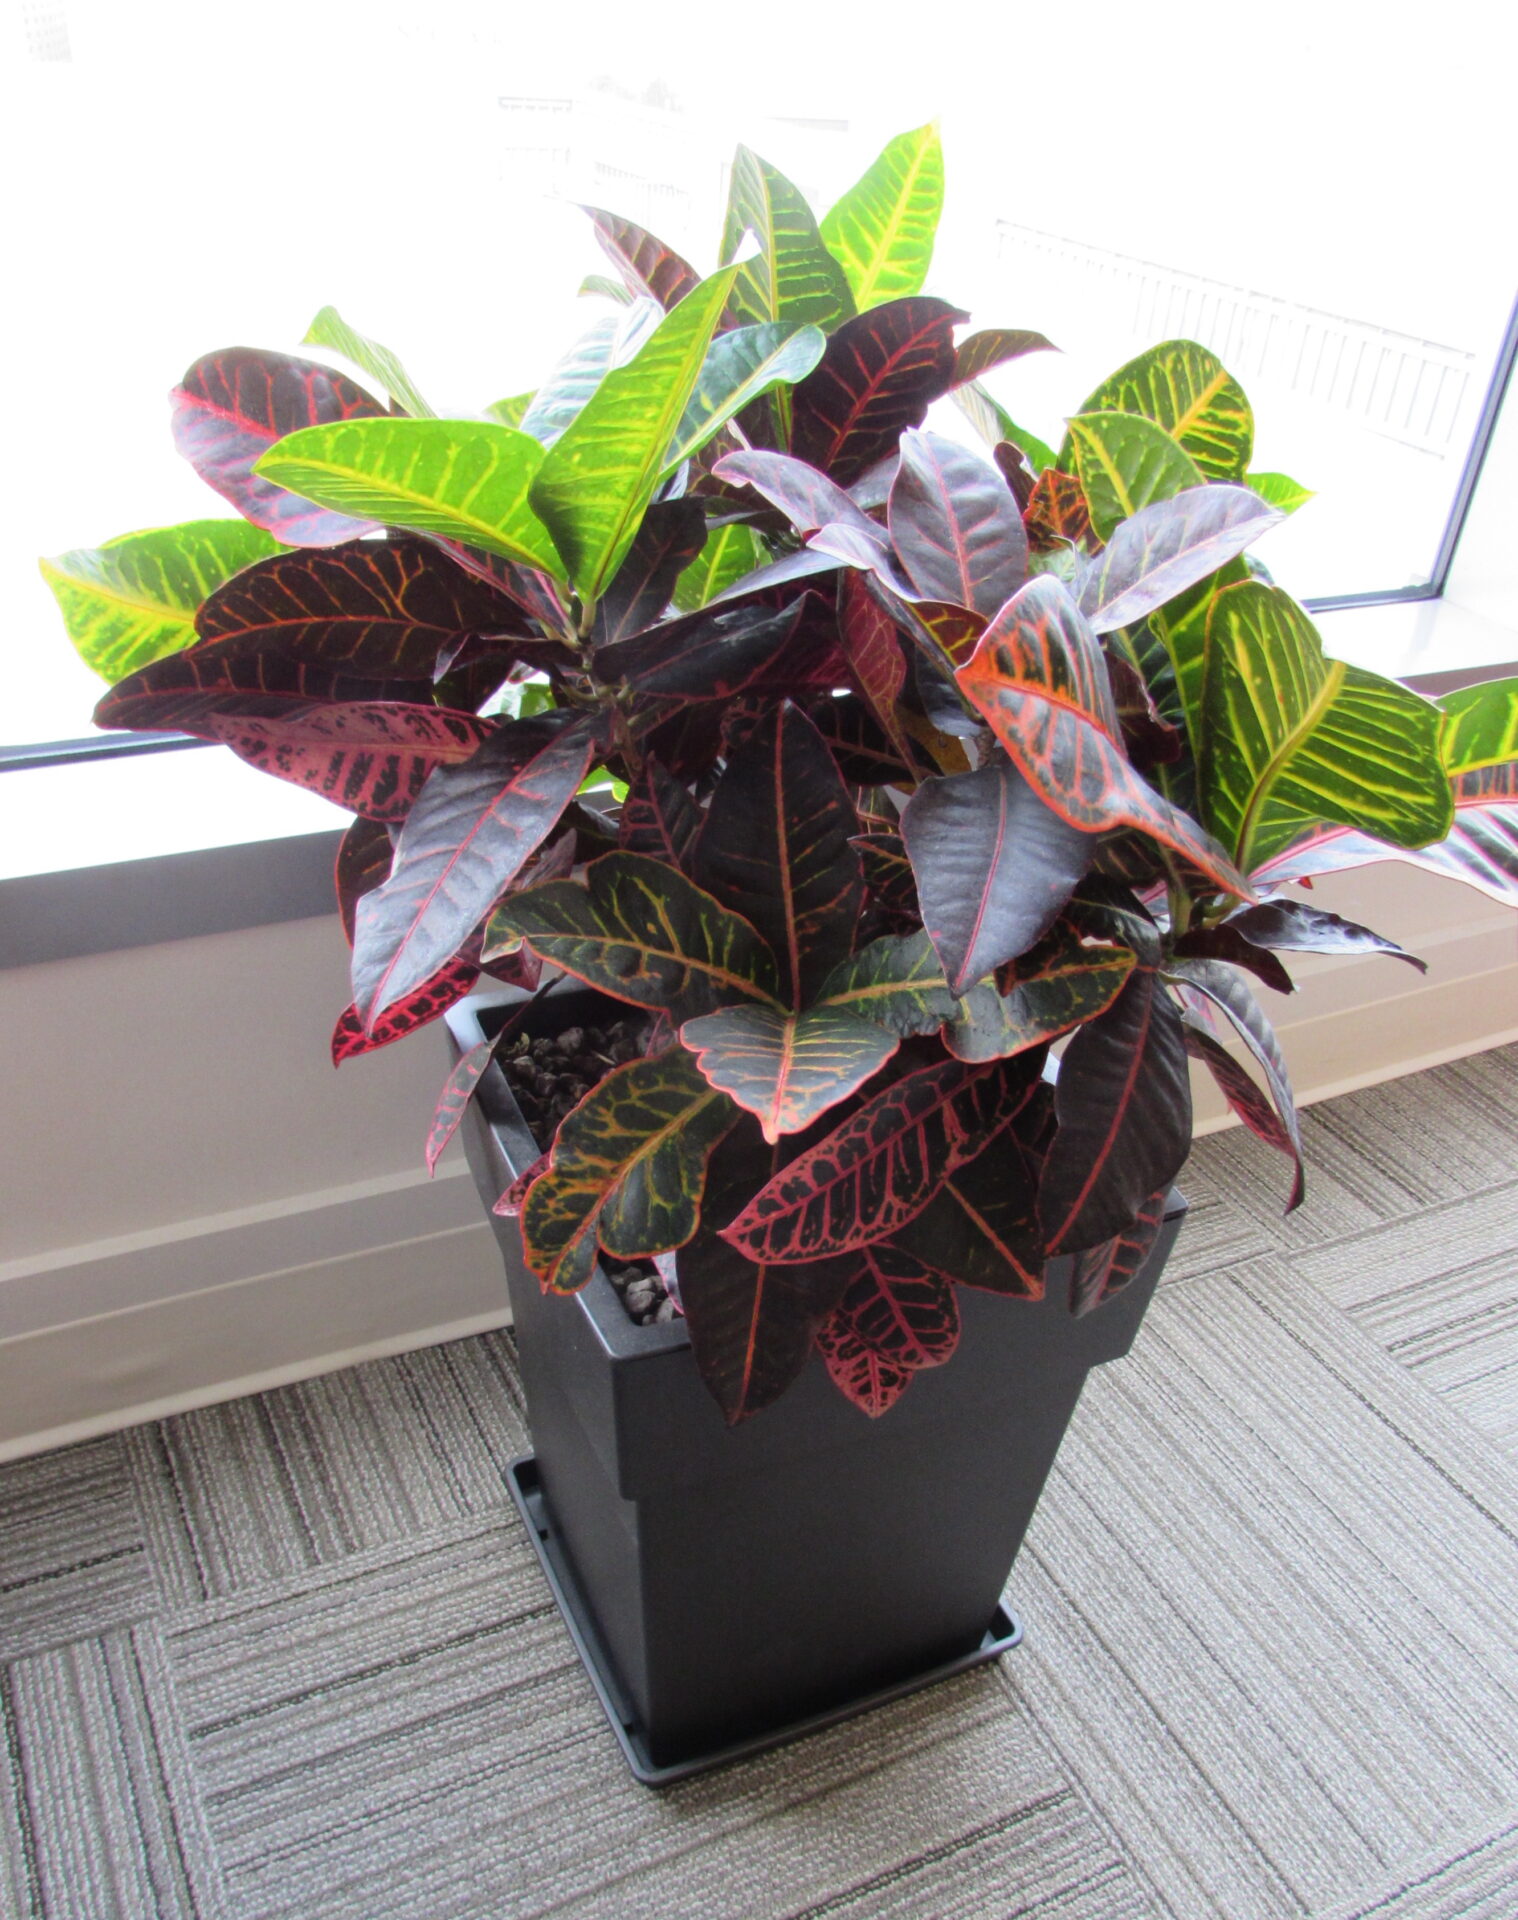 A vibrant potted plant with variegated green and red leaves stands near a window on a patterned carpet floor in an indoor setting.